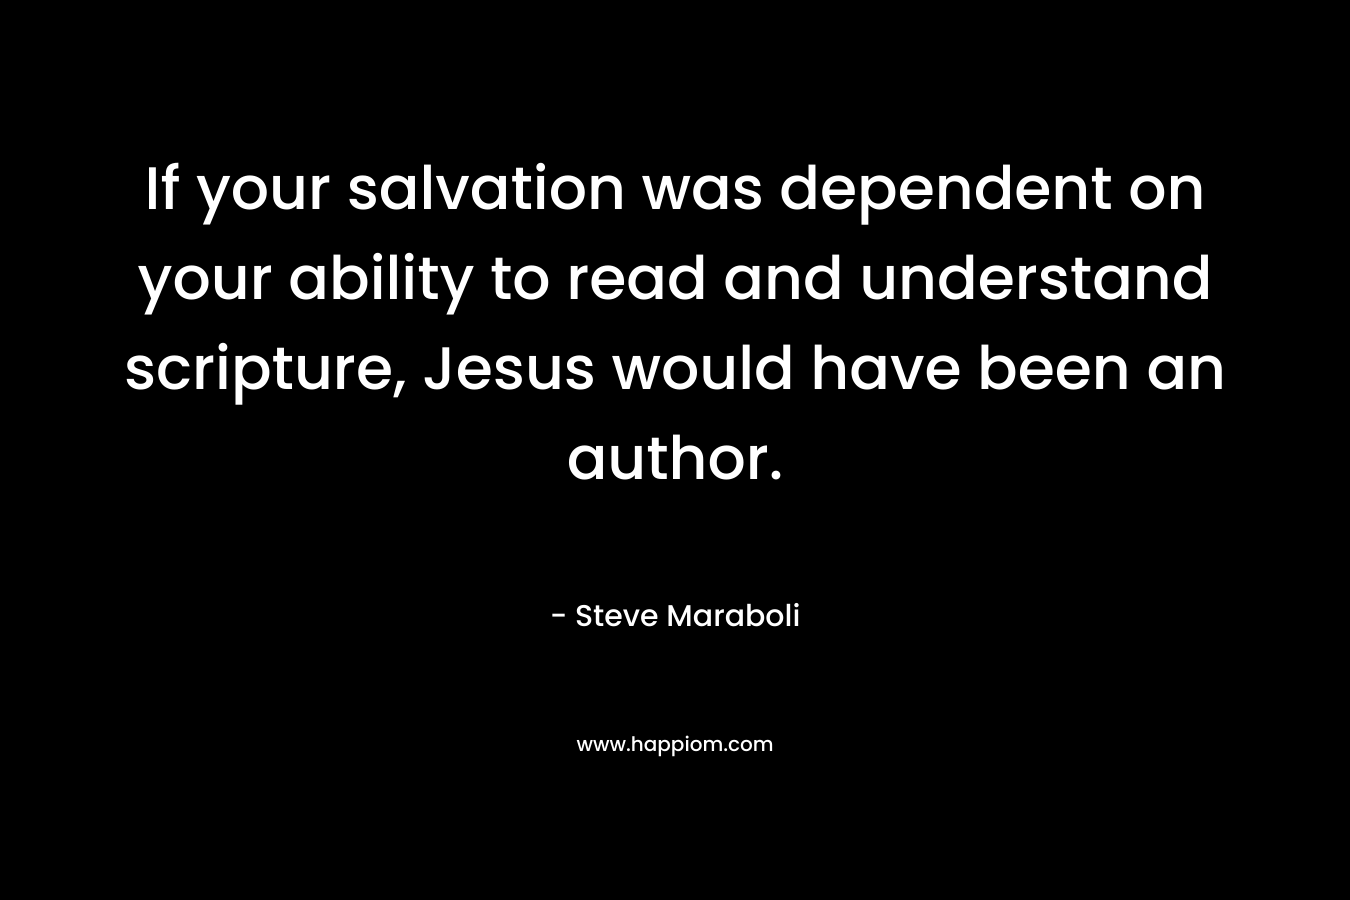 If your salvation was dependent on your ability to read and understand scripture, Jesus would have been an author.